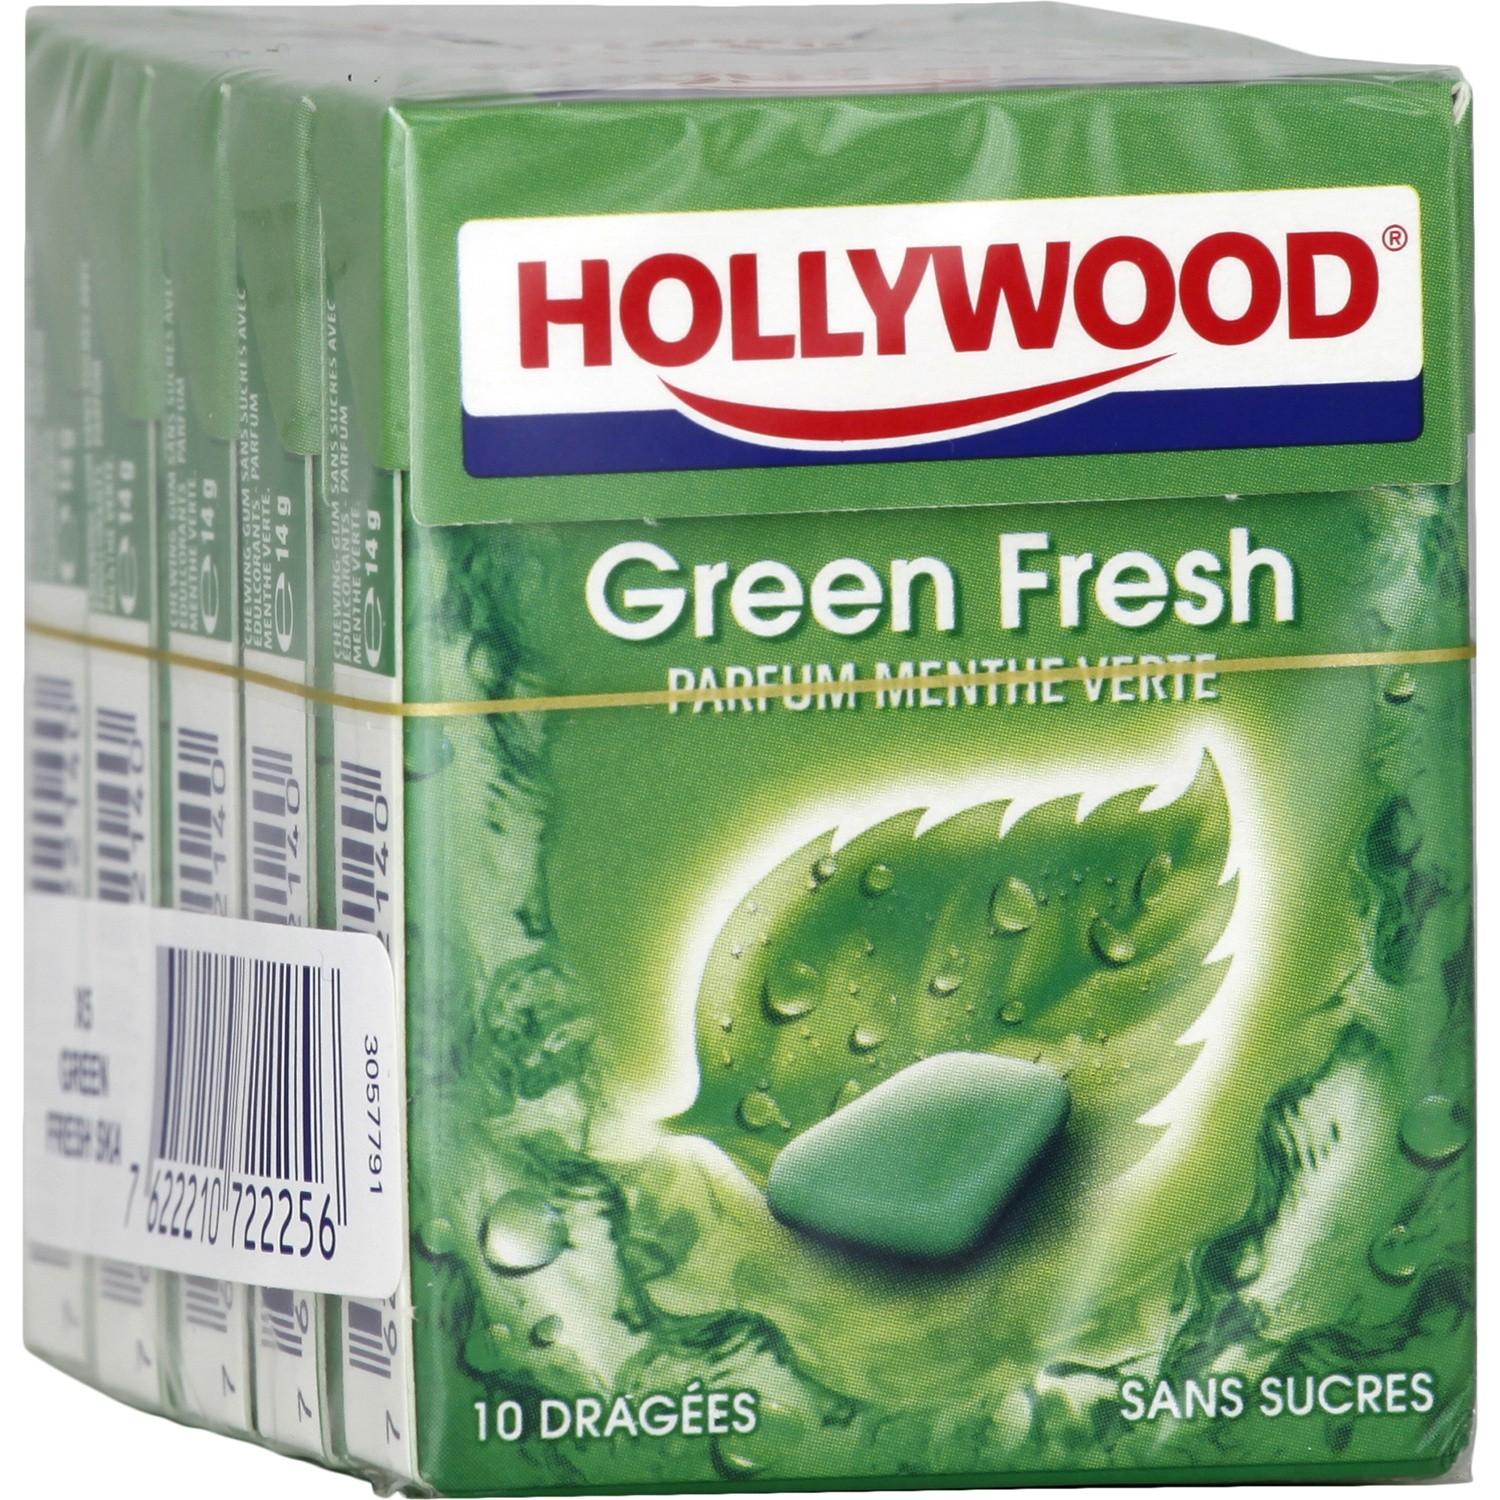 Green Mint Chewing-Gum Hollywood